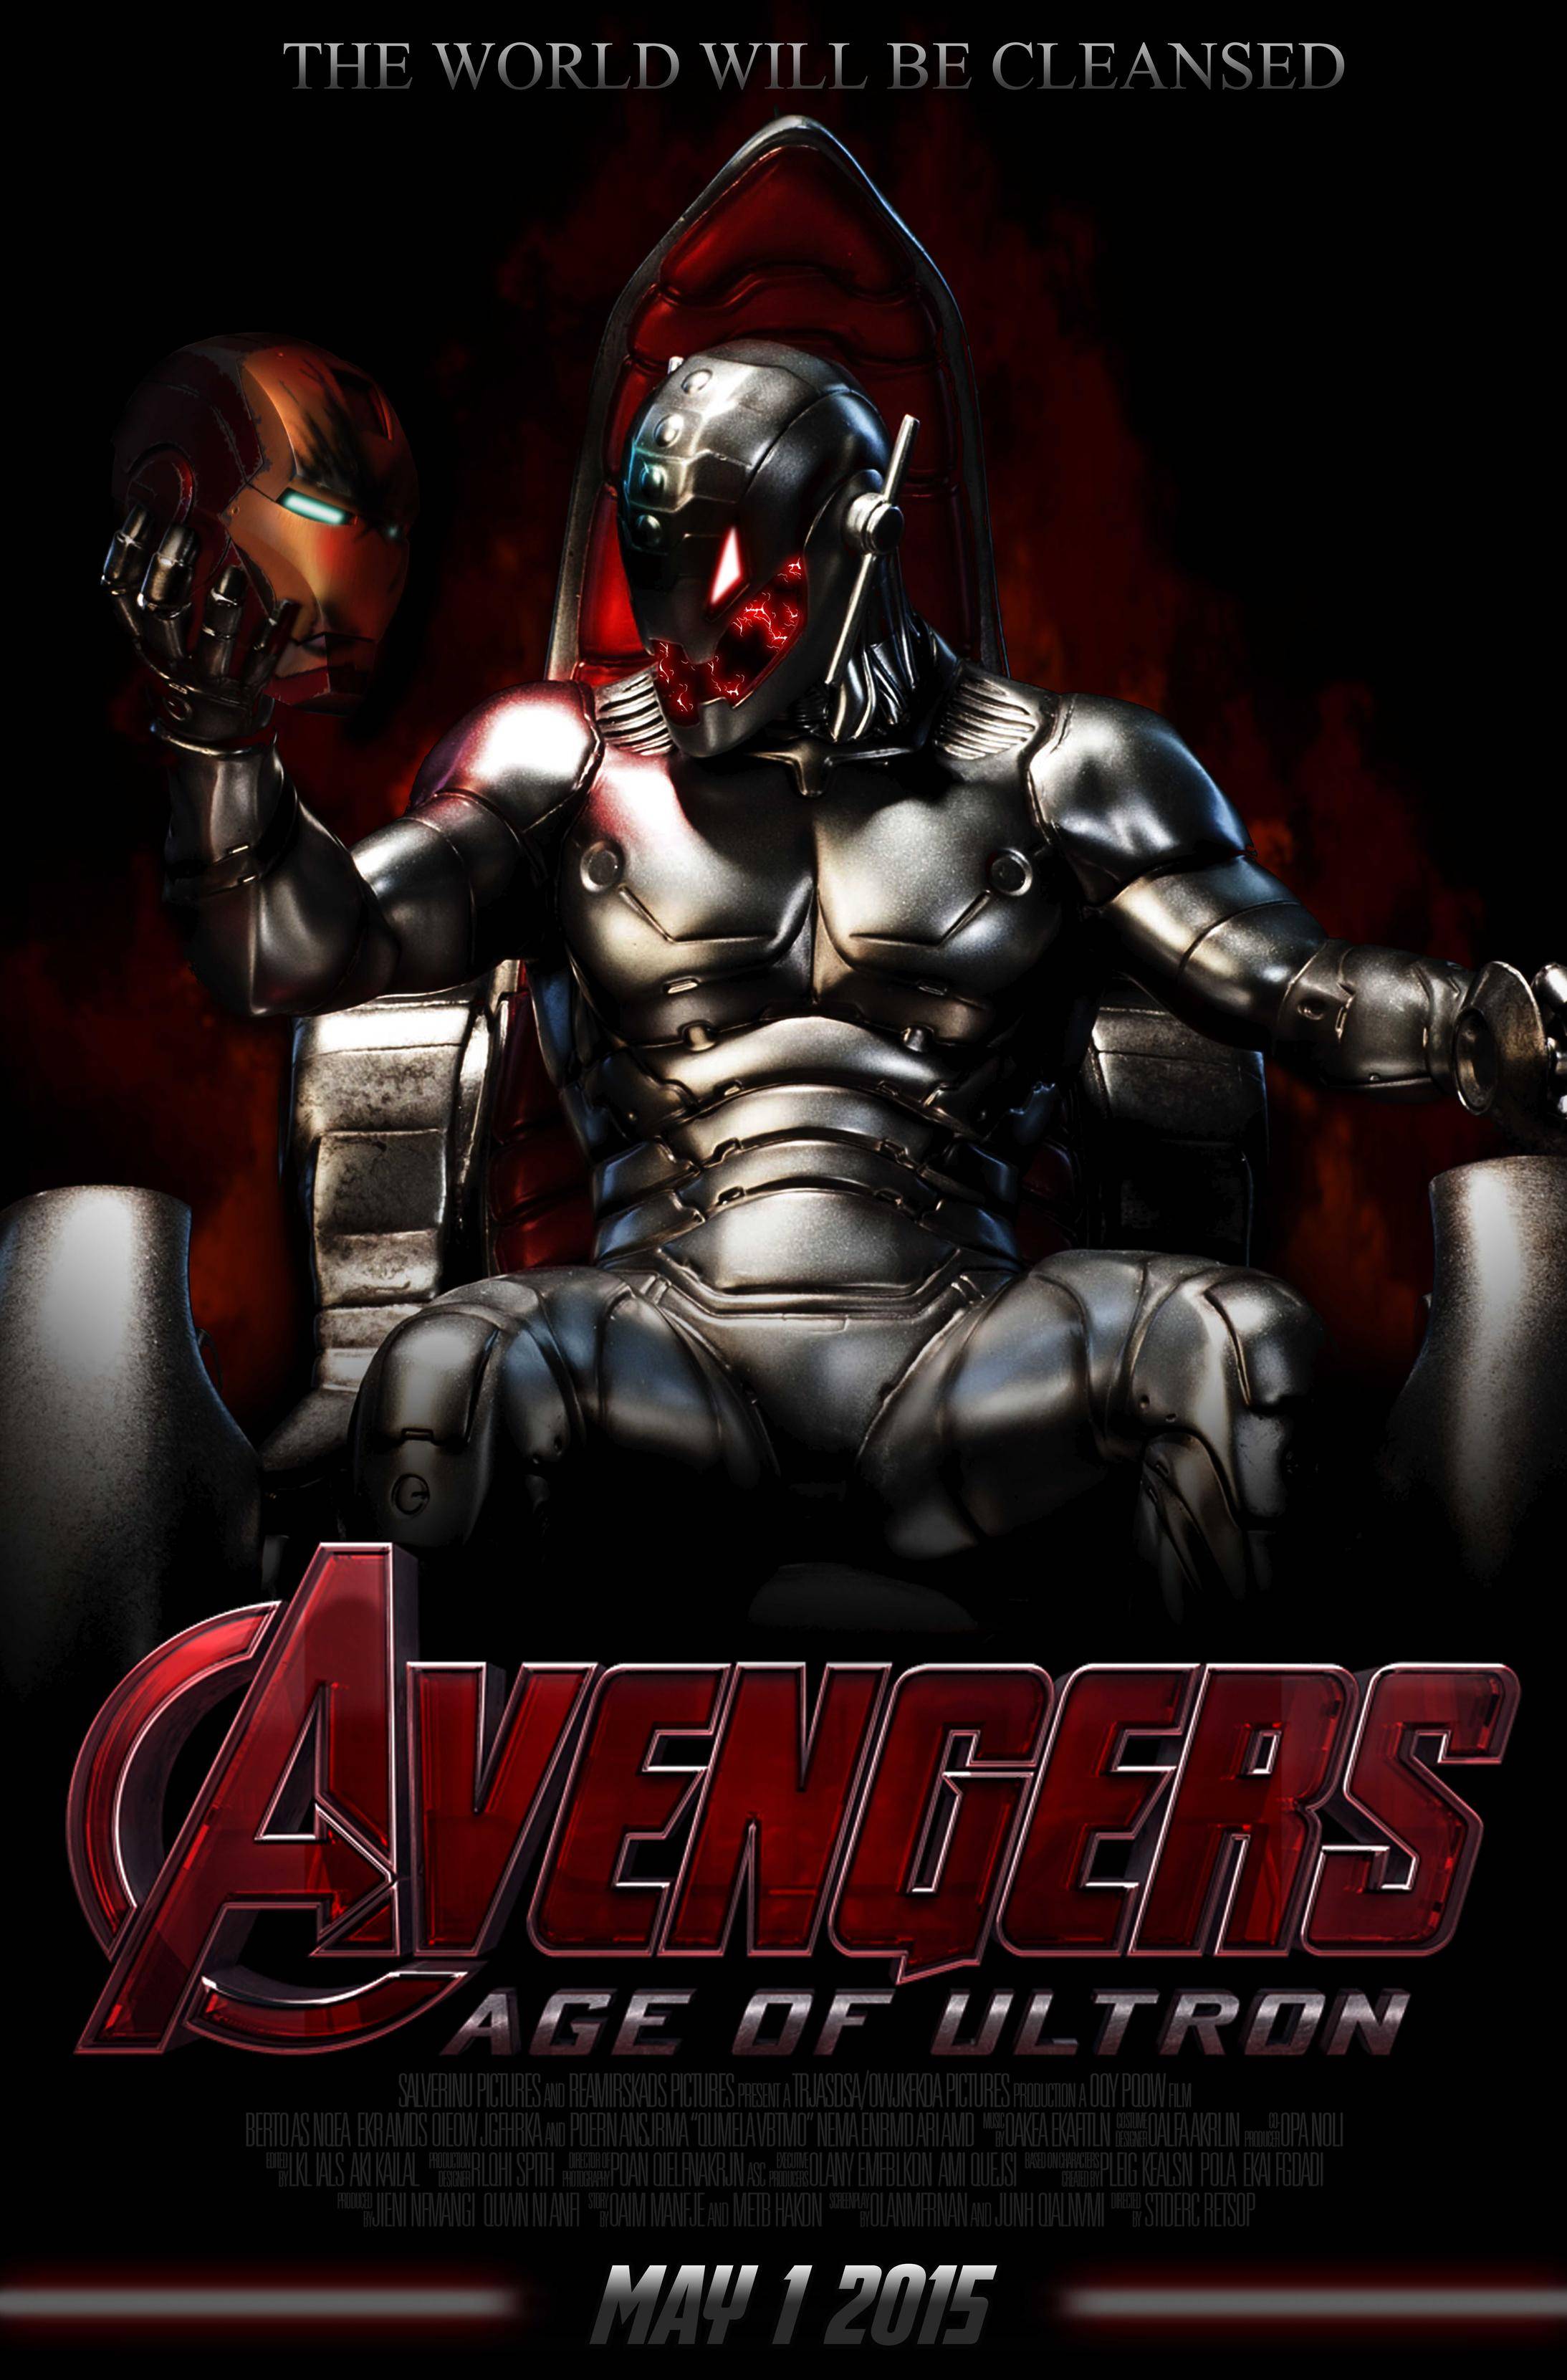 The Avengers: Age Of Ultron Wallpaper Android Application